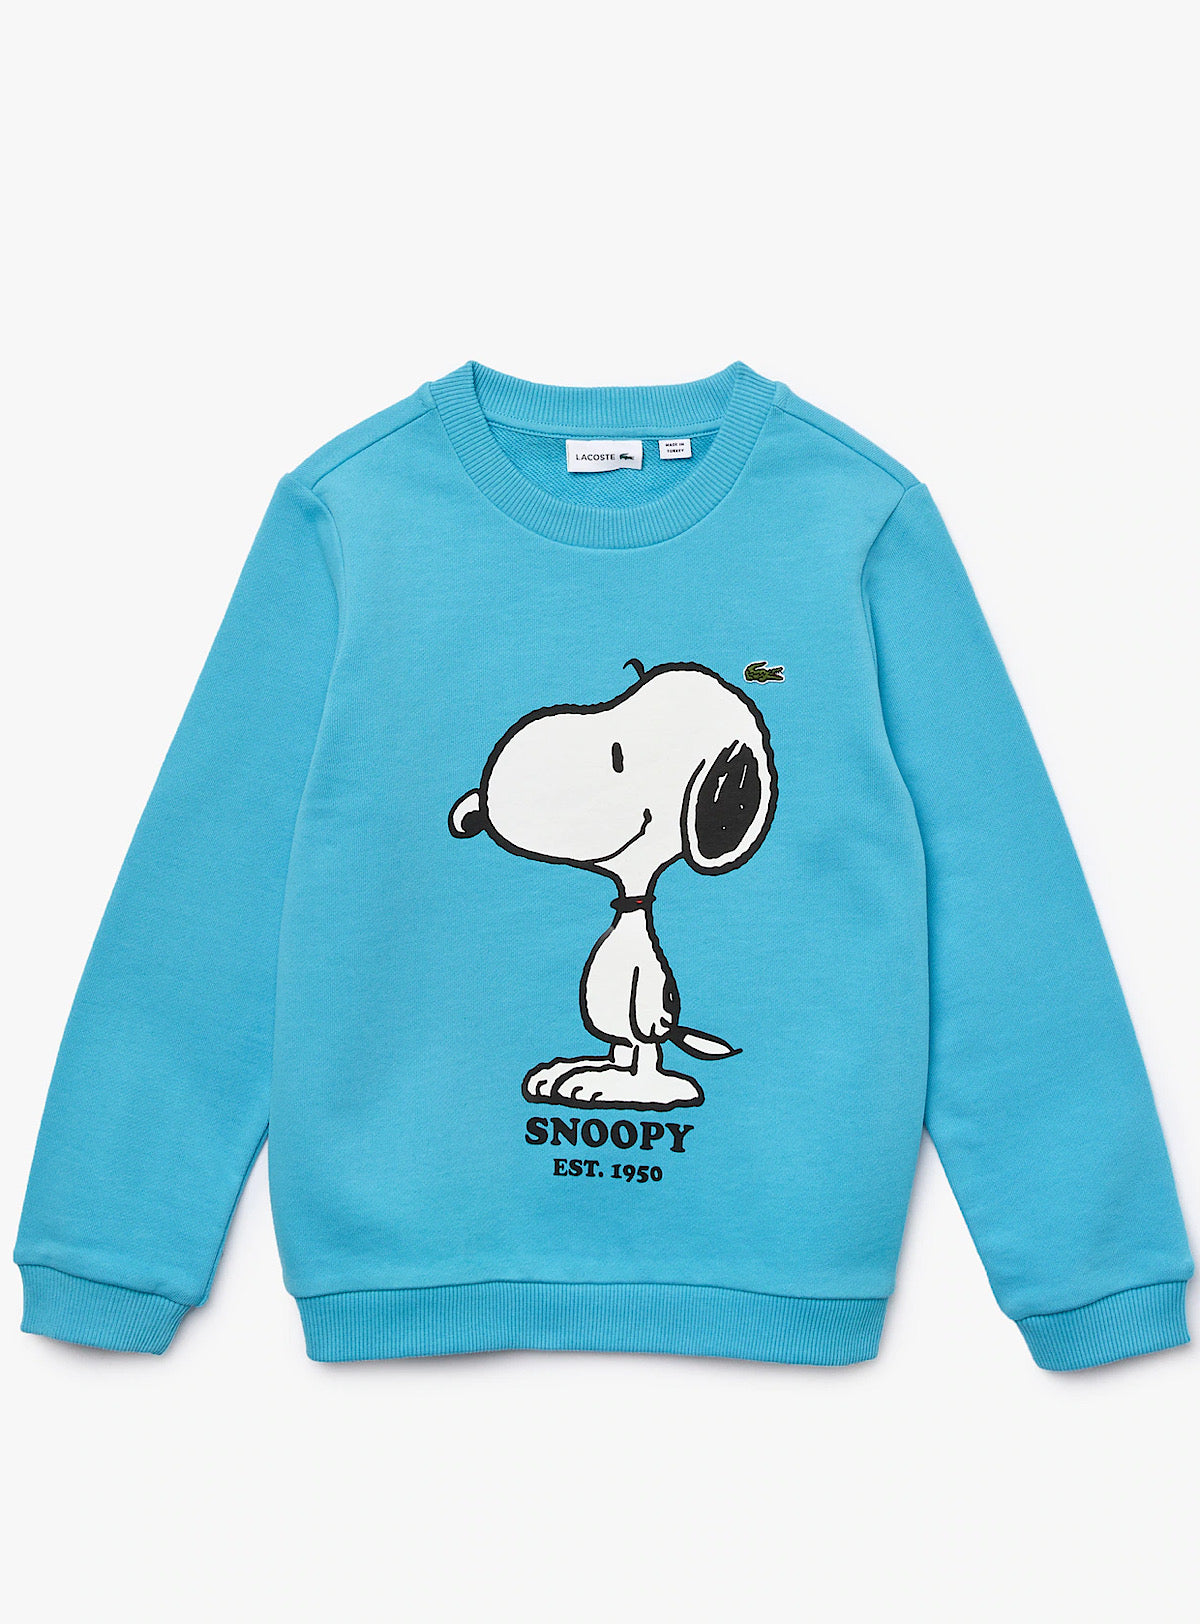 Lacoste Kids Sweater - Snoopy - Blue And White - SJ7890 – Vengeance78